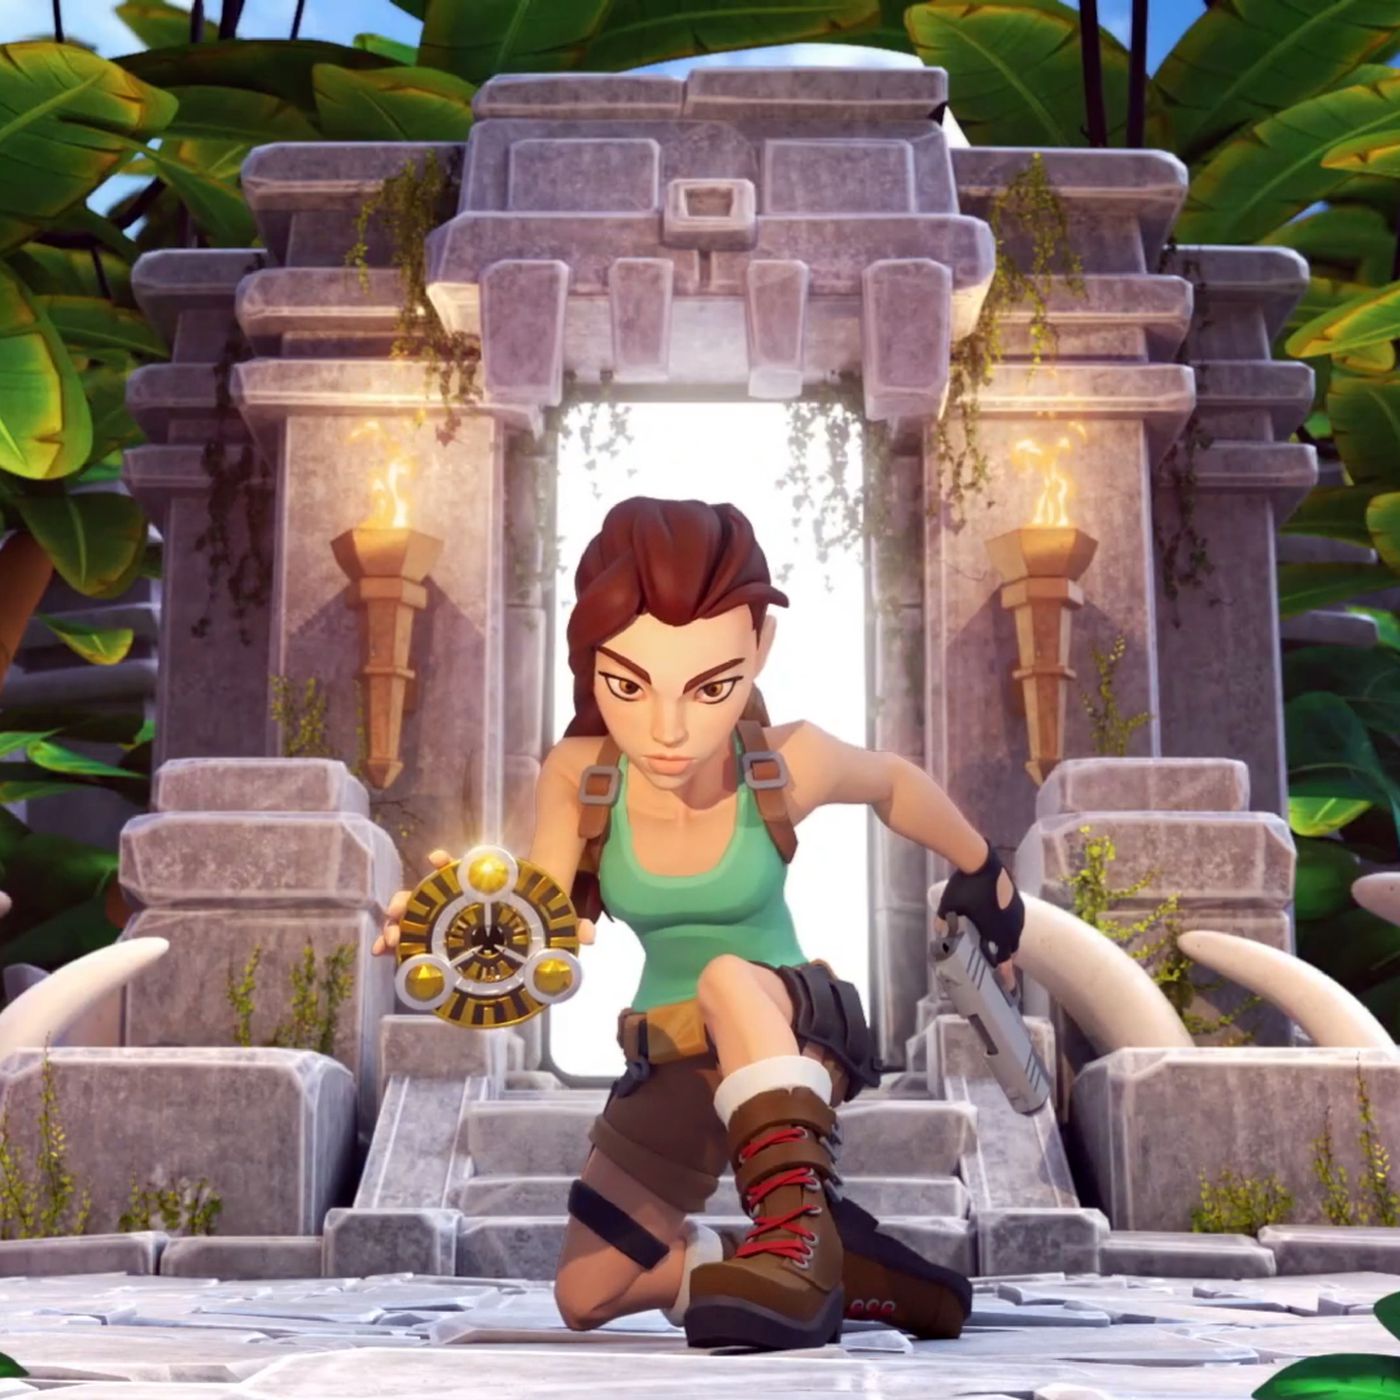 New Tomb Raider game announced for Android, iOS launch in February - Polygon